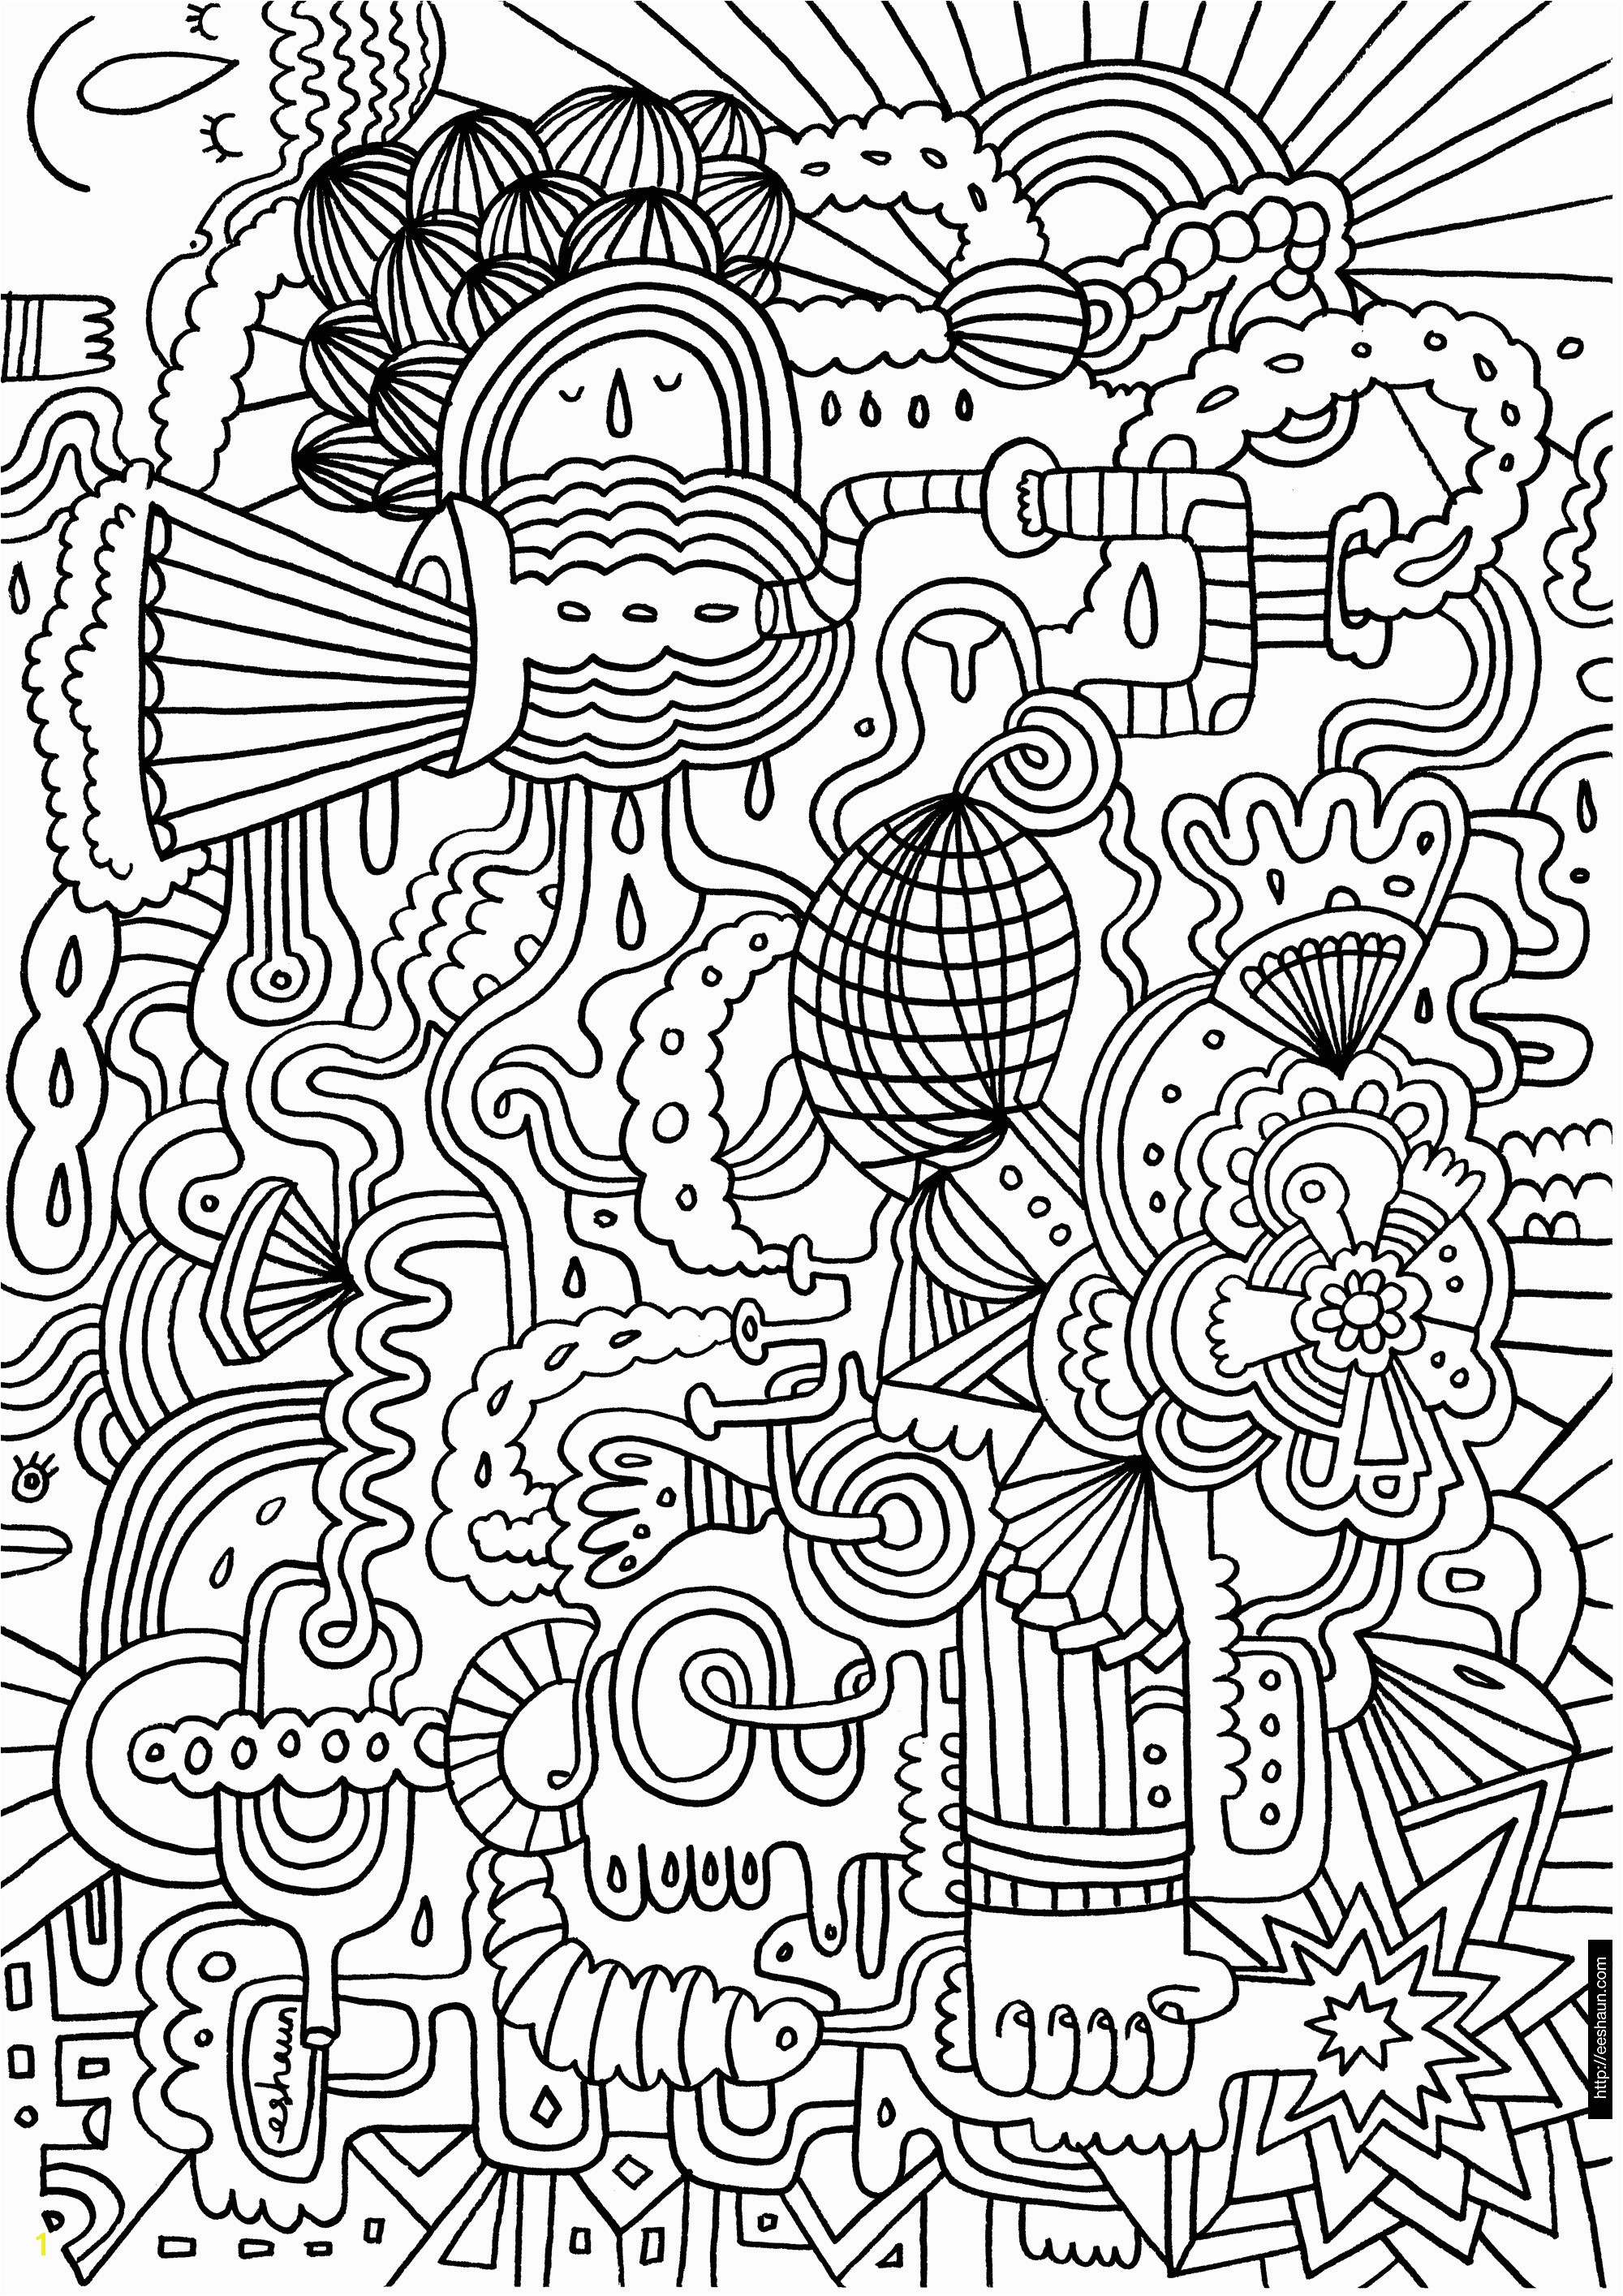 Free Difficult Coloring Pages Elegant Hard Coloring Pages Coloring Pages Free Difficult Coloring Pages Inspirational